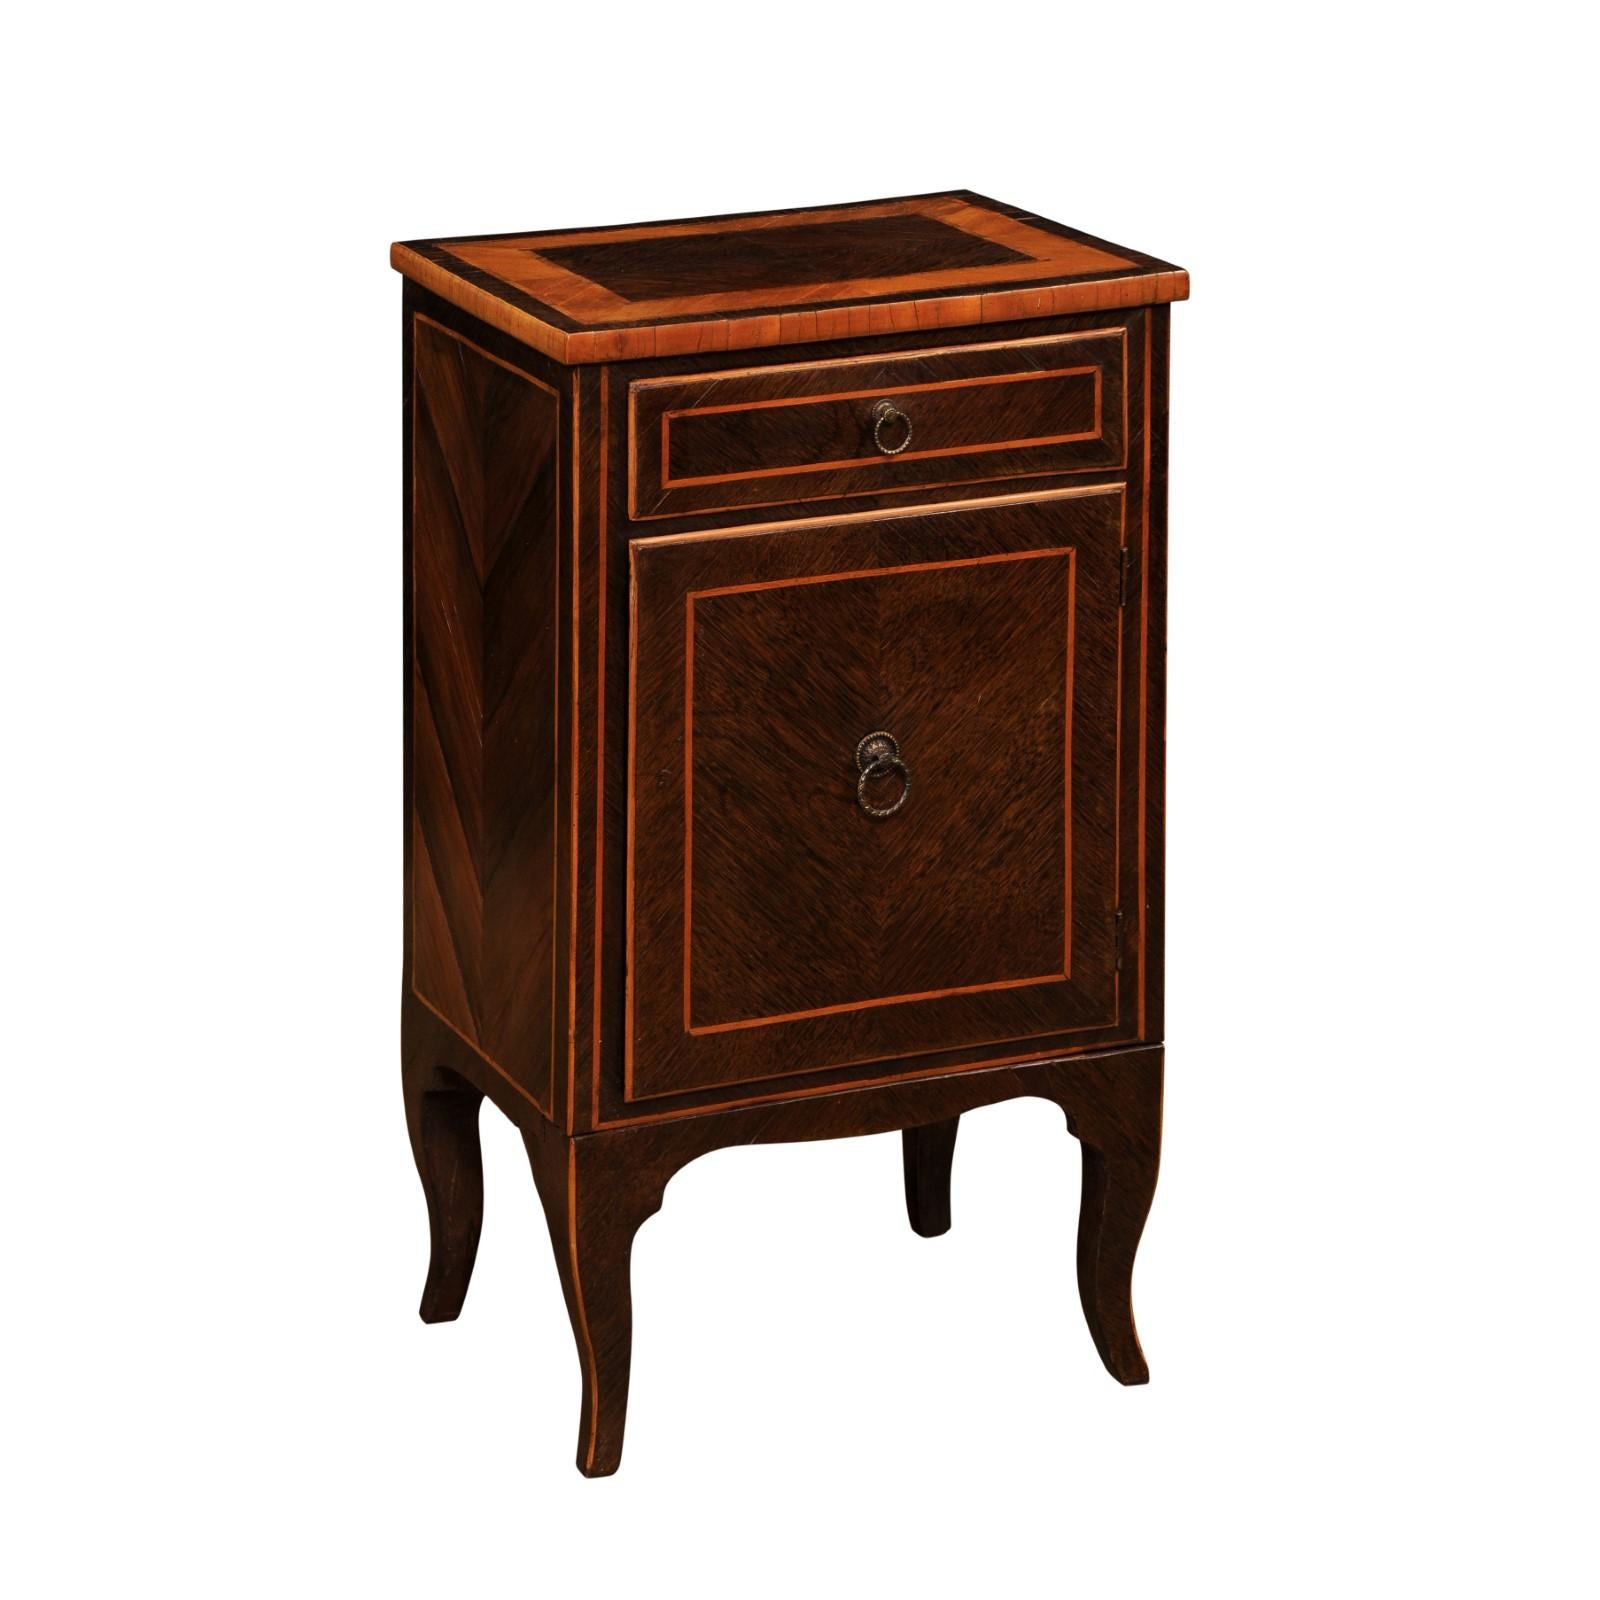 An Italian mahogany and walnut bedside table from the 19th century, with inlaid décor, single drawer over single door, pull out bottom and cabriole legs. Created in Italy during the 19th century, this bedside table captures our attention with its